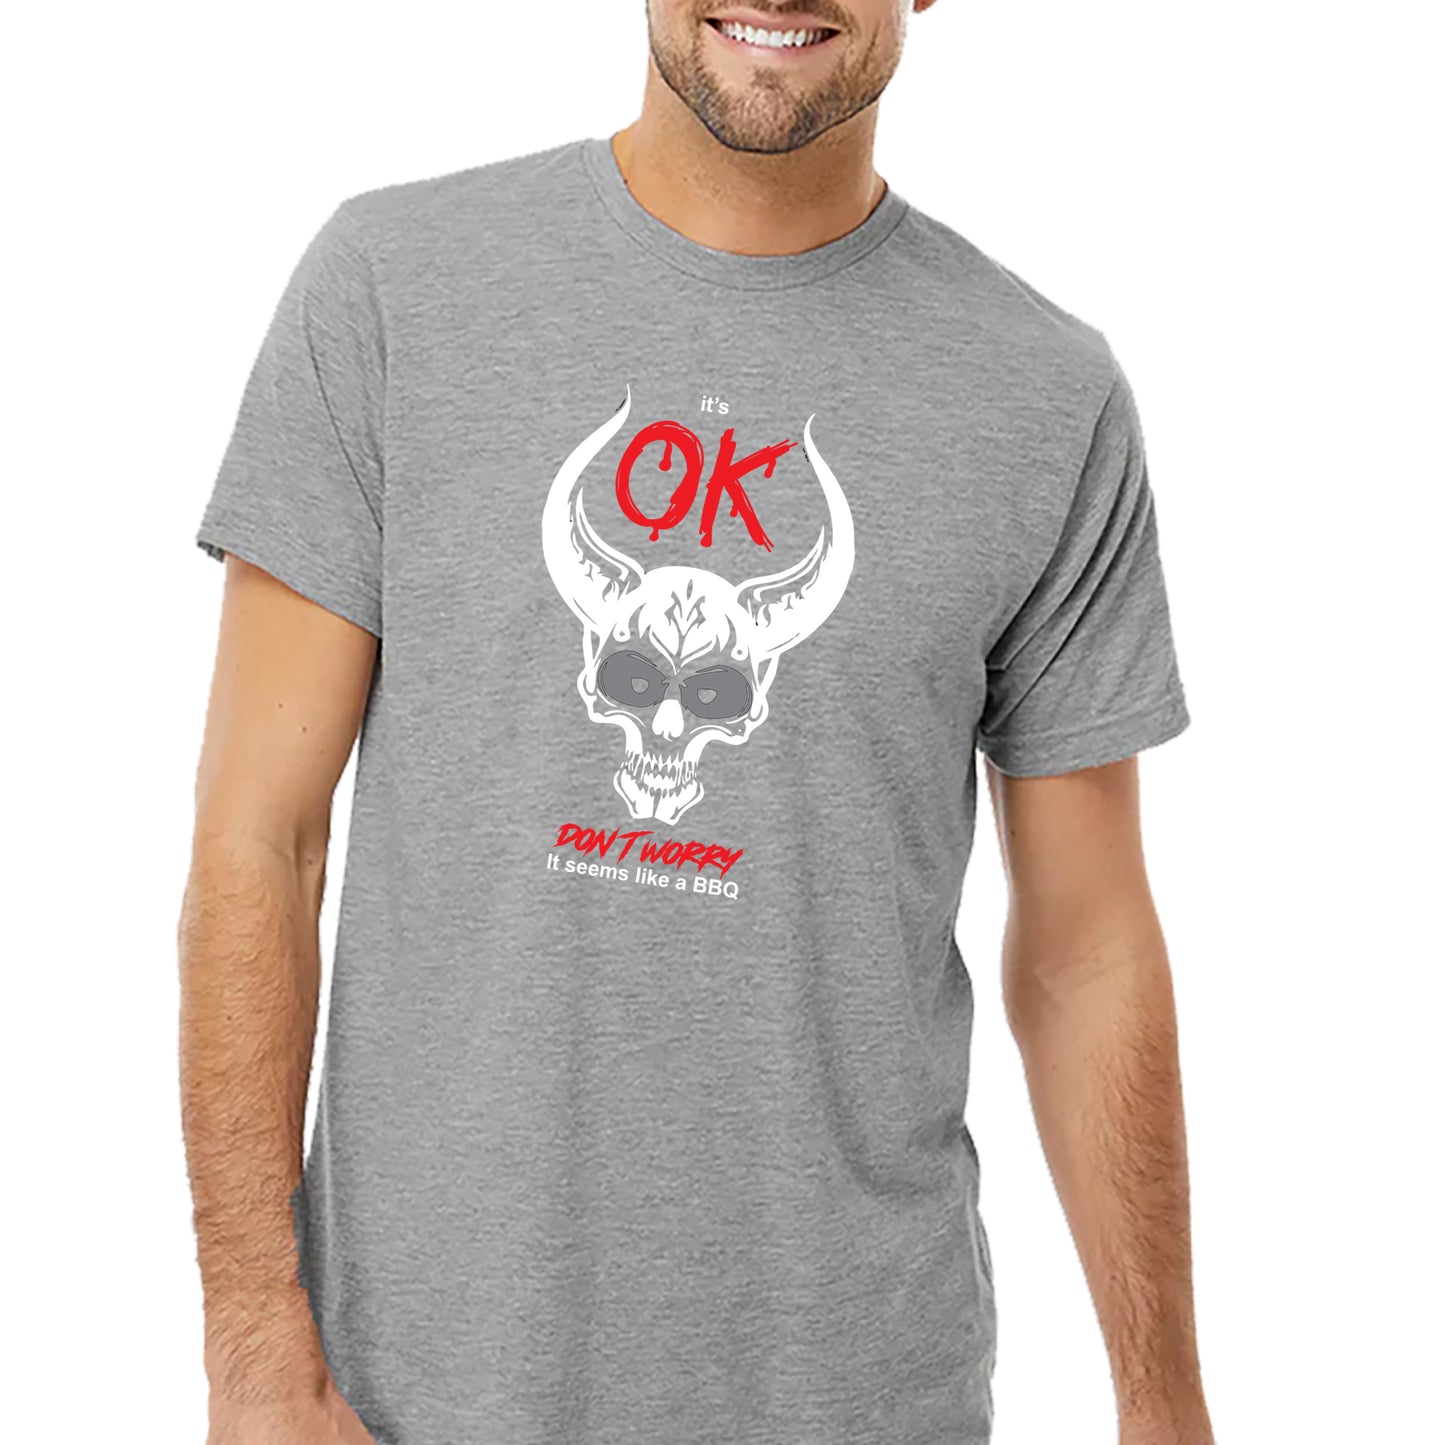 It's Ok Don't Worry T-Shirt